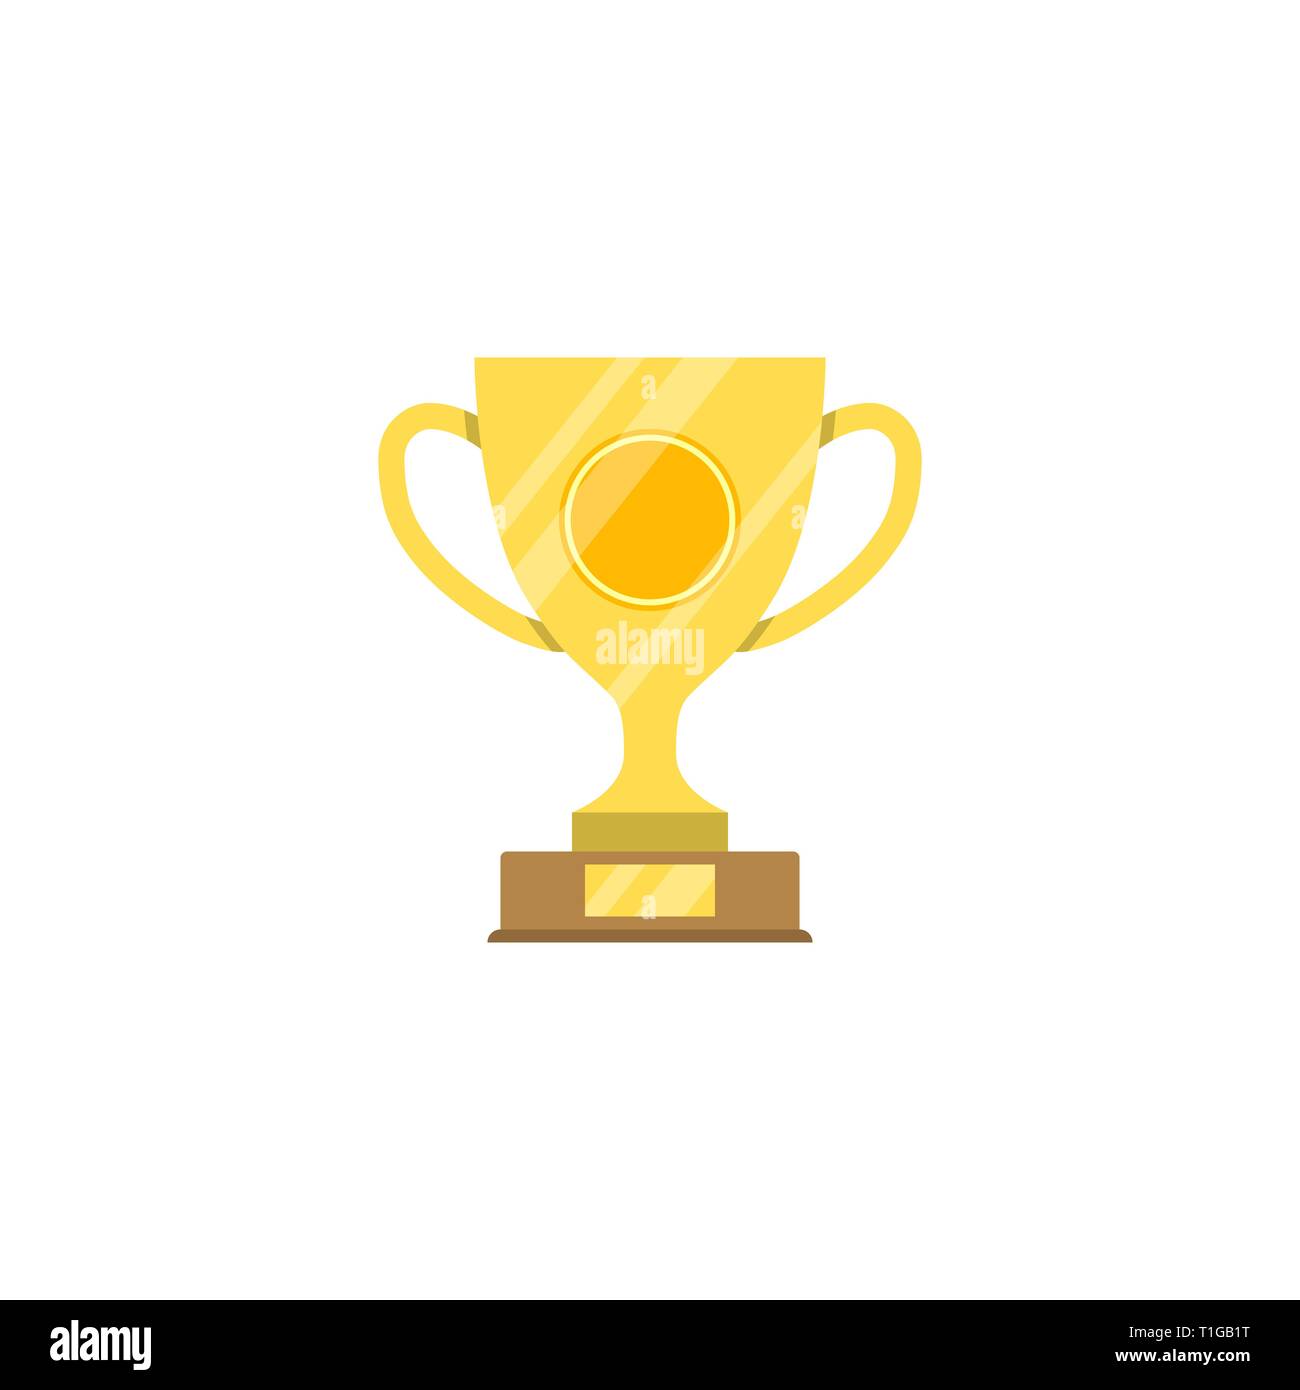 Award Cup Icon. Award Cup Vector Flat Icon Isolated on White Background Stock Vector